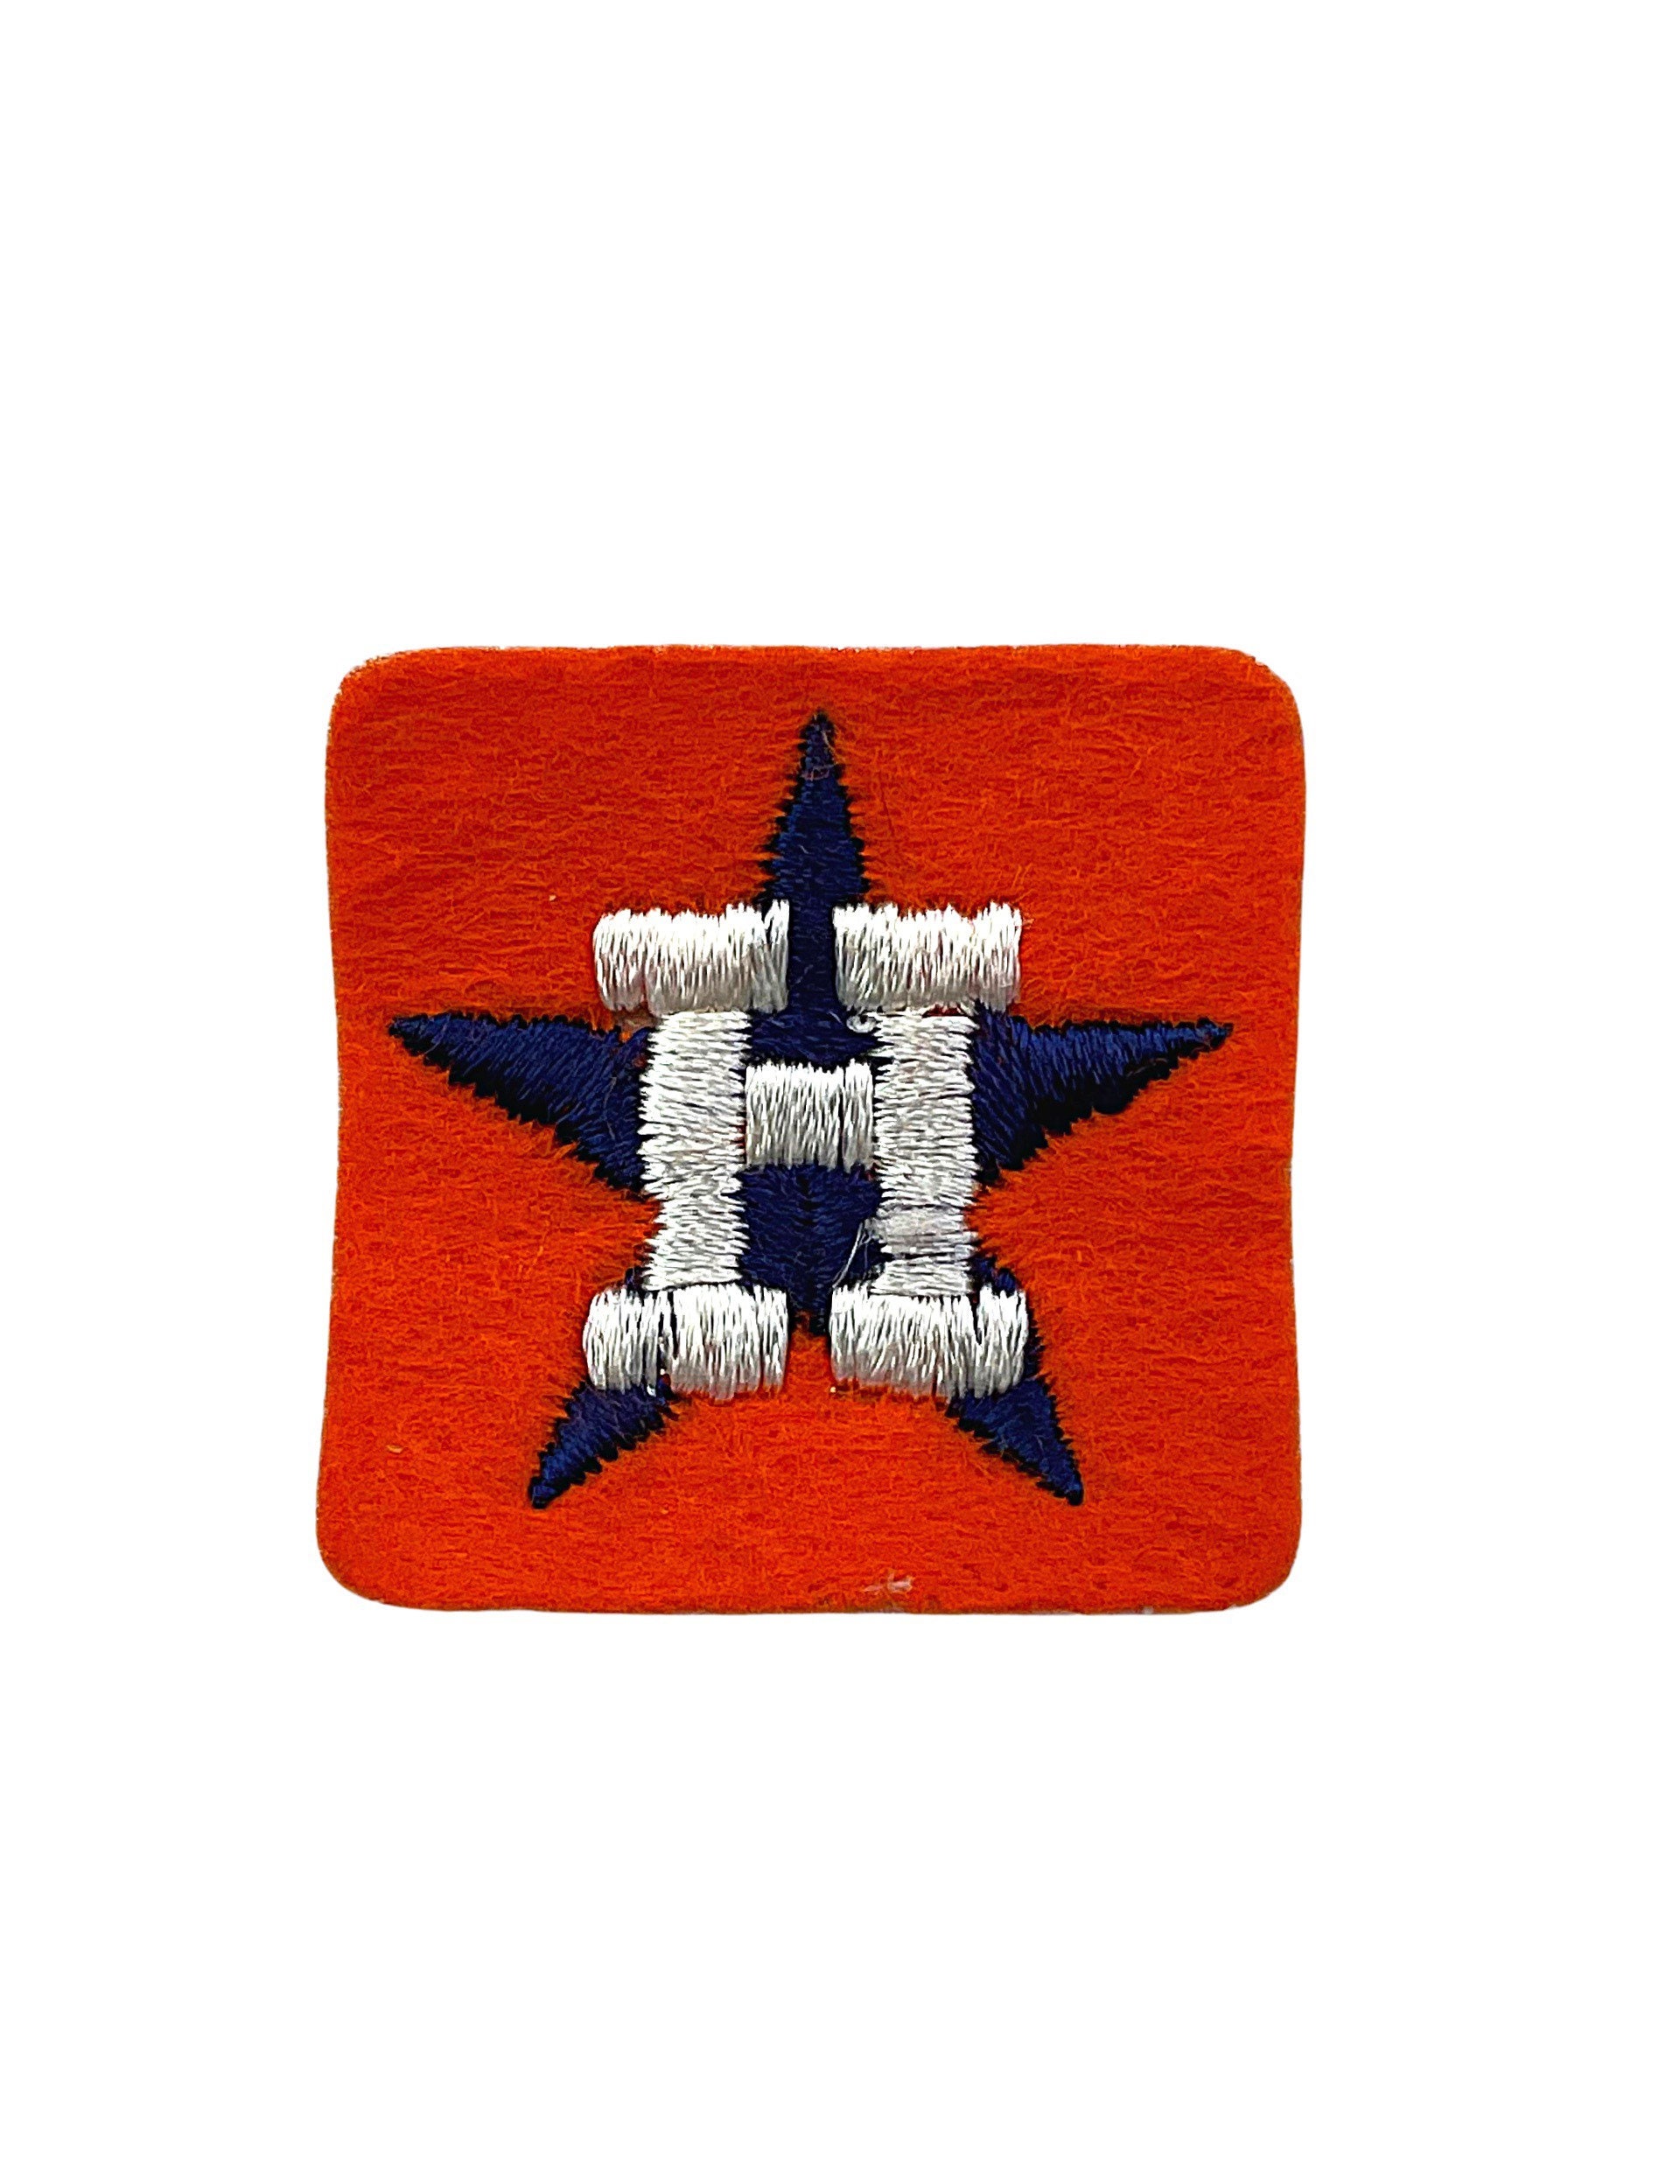 Houston Astros 713 Jersey Patch City Embroidered Major League Baseball –  Patch Collection